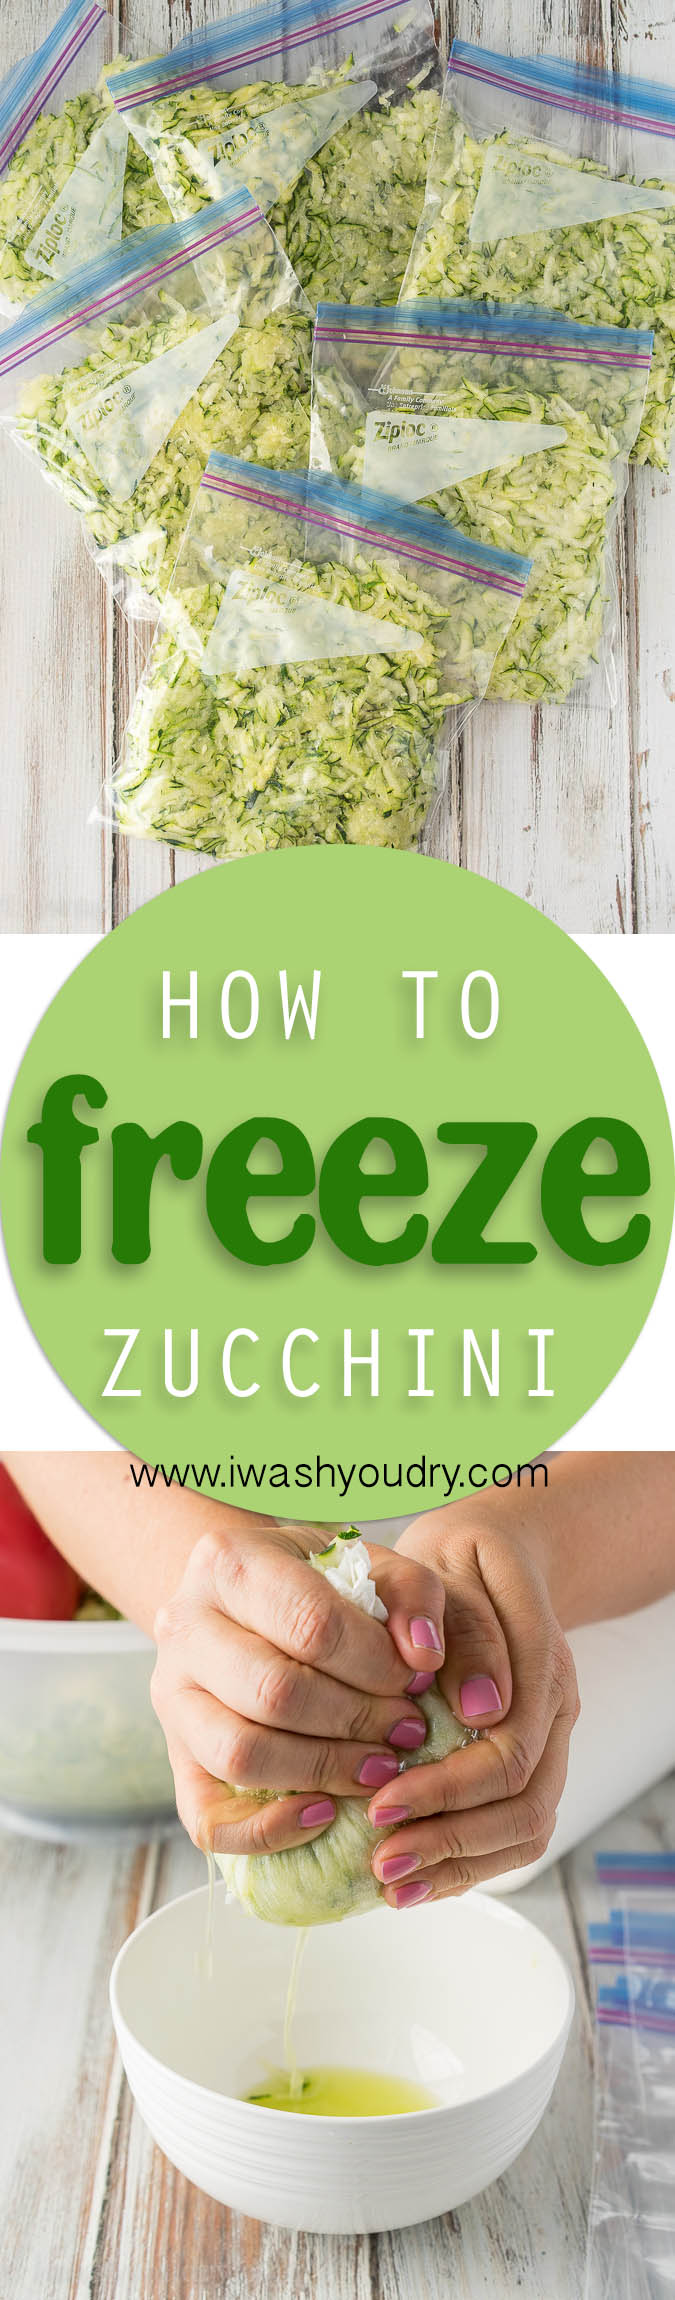 This is such a clever idea on how to freeze my surplus of zucchini from my garden!